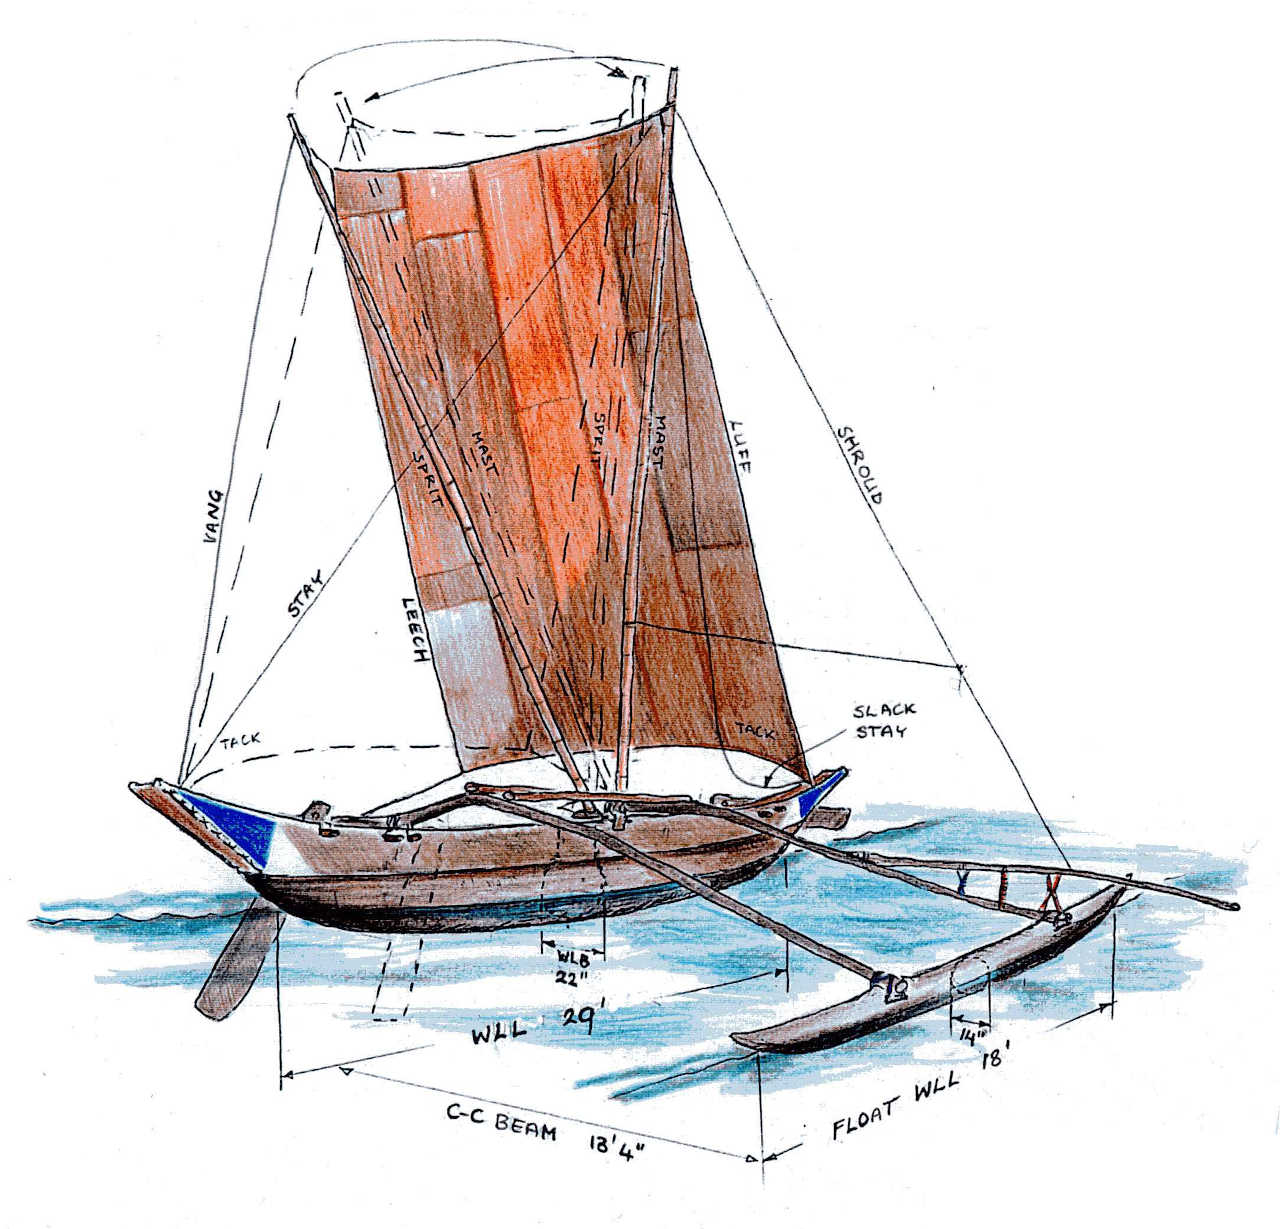 Drawing of outrigger canoe with measurements